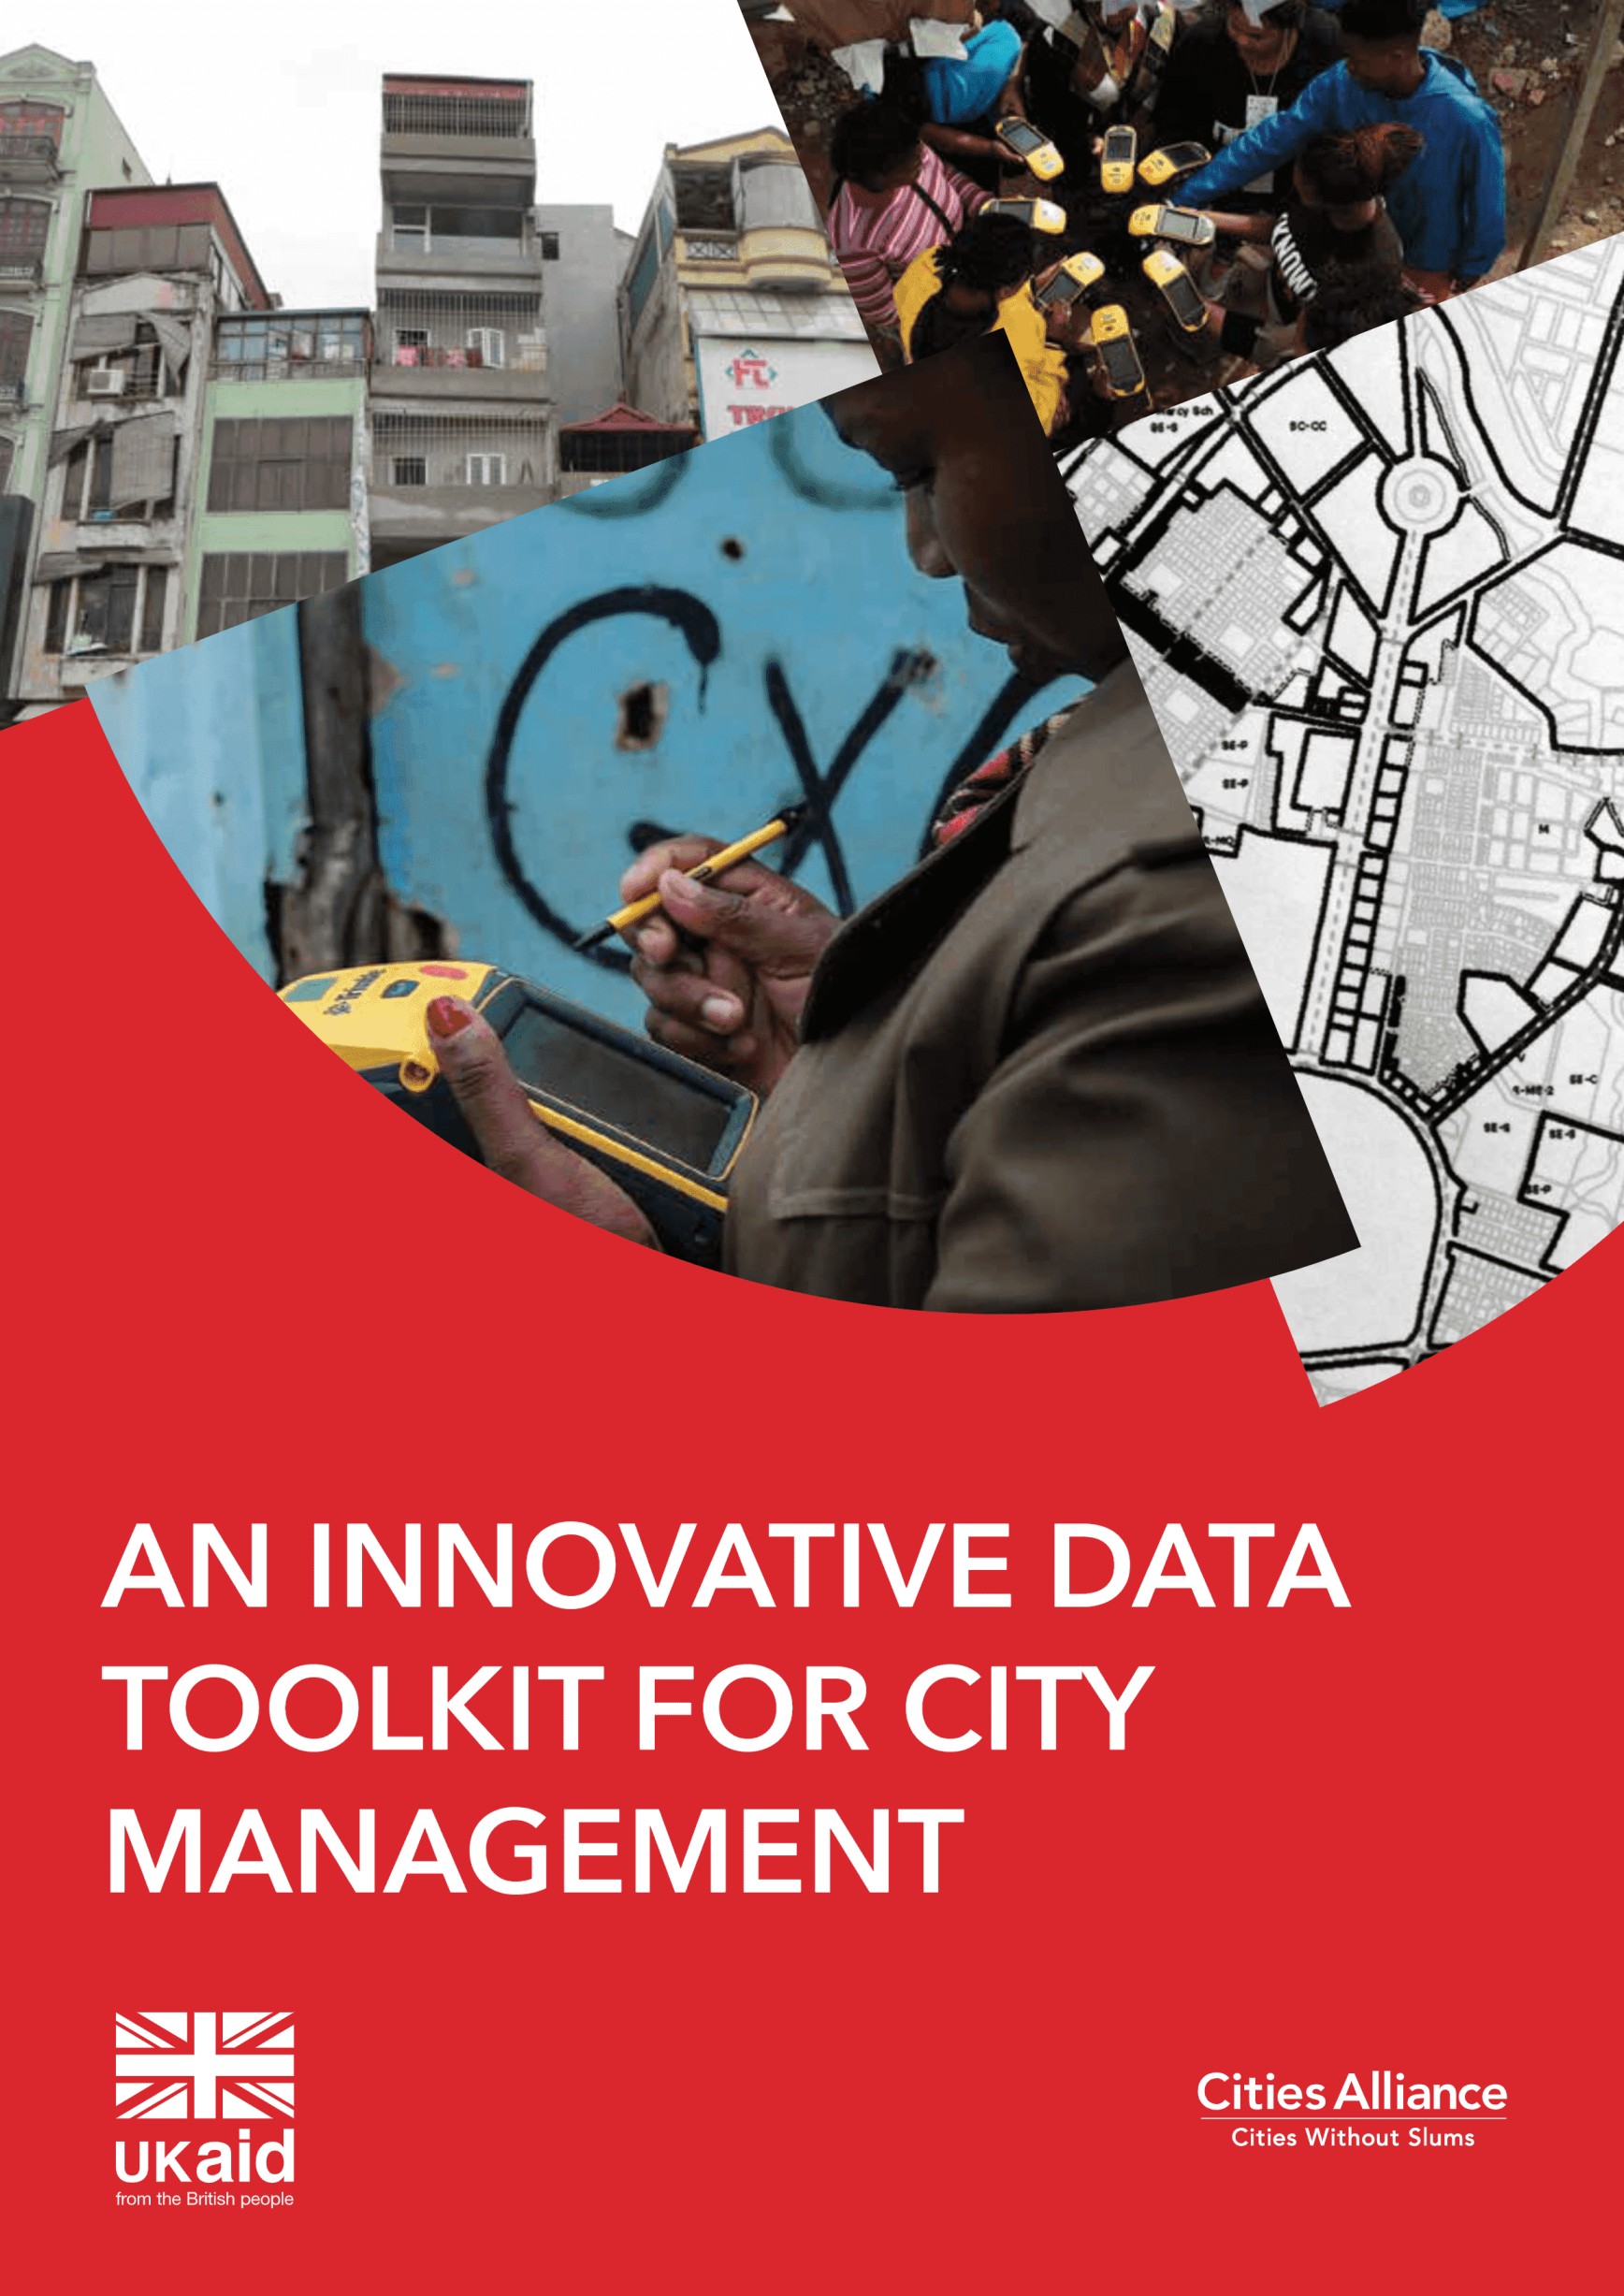 Innovative Data Toolkit for City Management